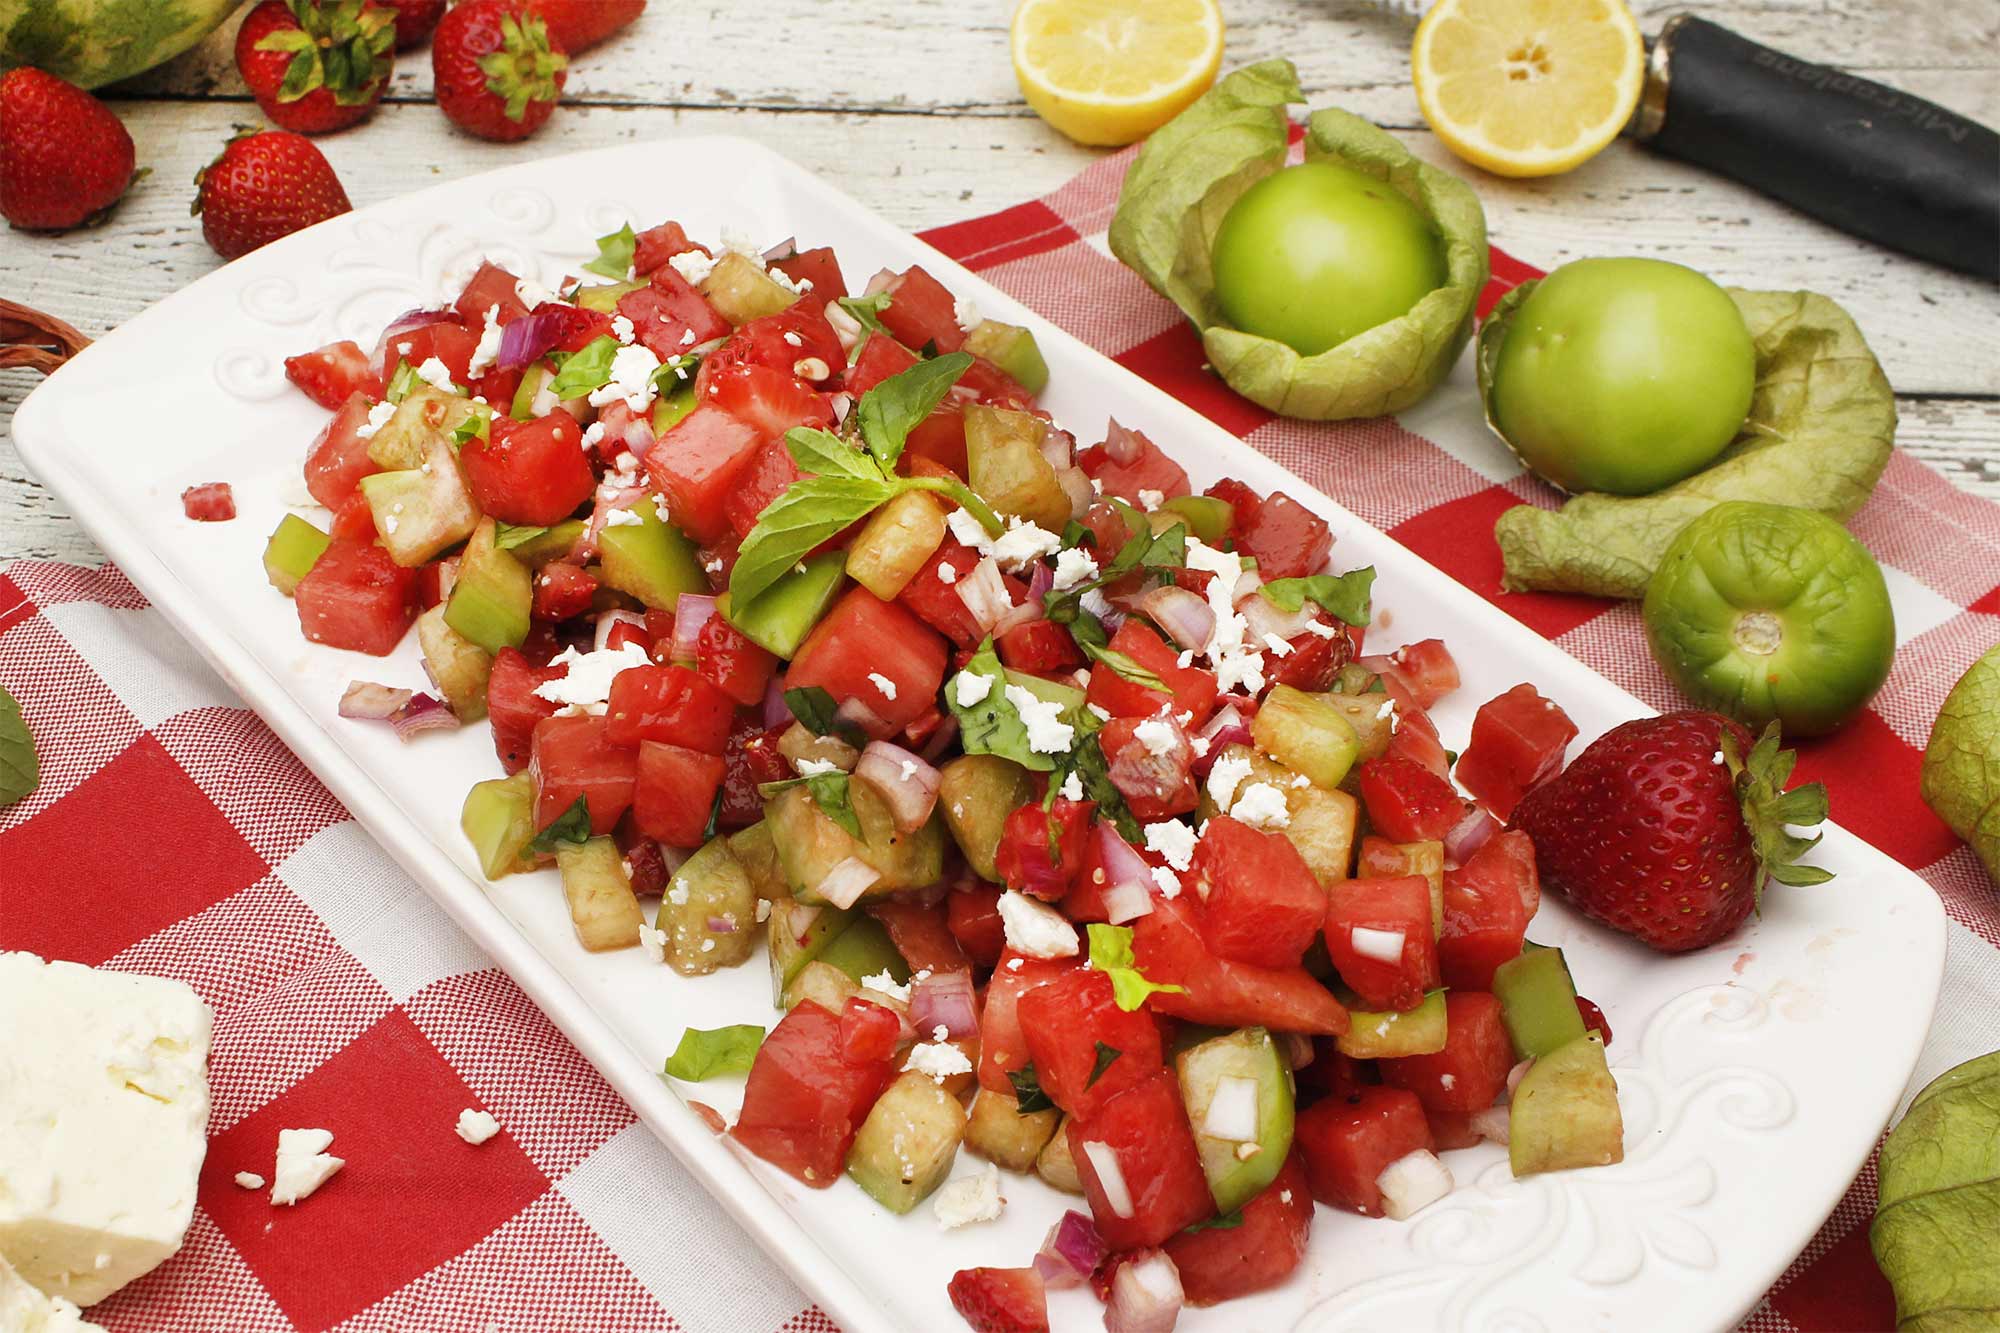 Full Circle - Recipe: Tomatillo Salad with Watermelon and Strawberry